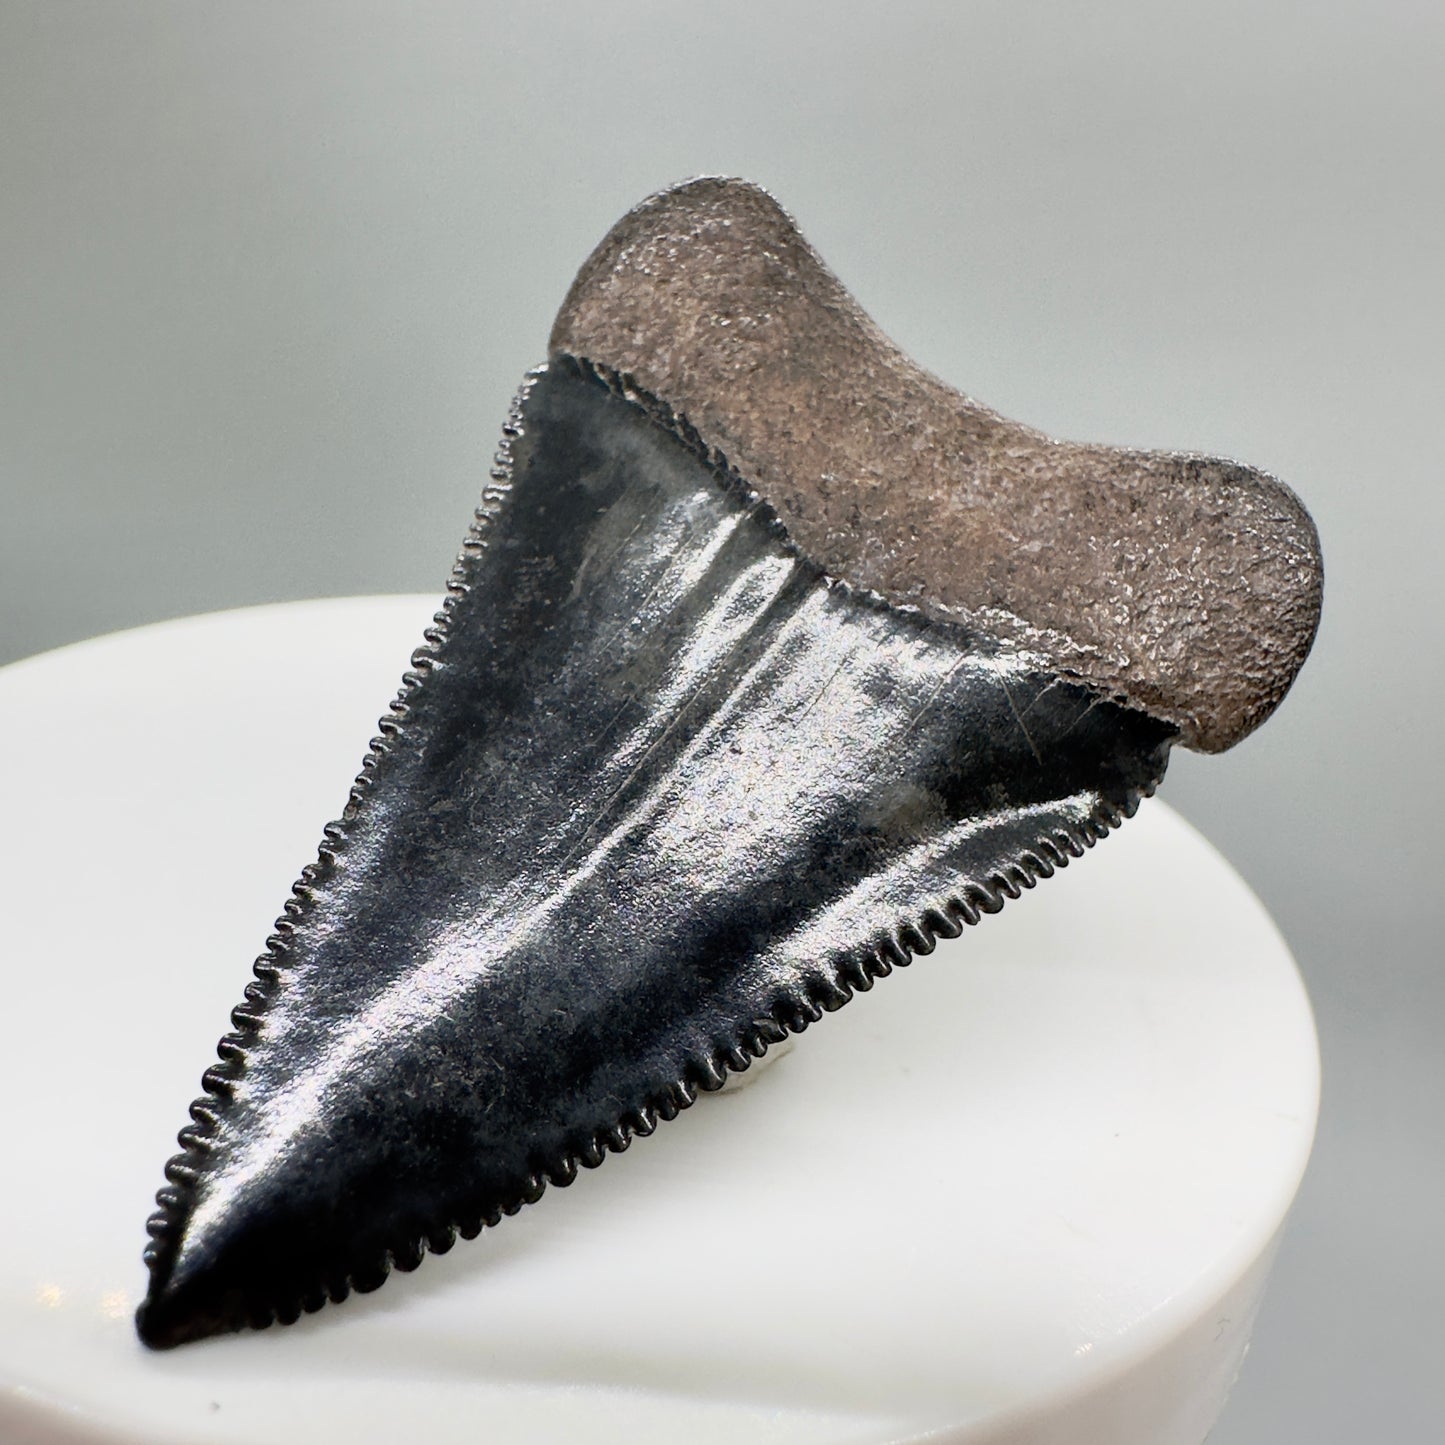 Colorful, sharply serrated 1.87" Fossil Great White Shark Tooth - South Carolina River GW1079 - Back right